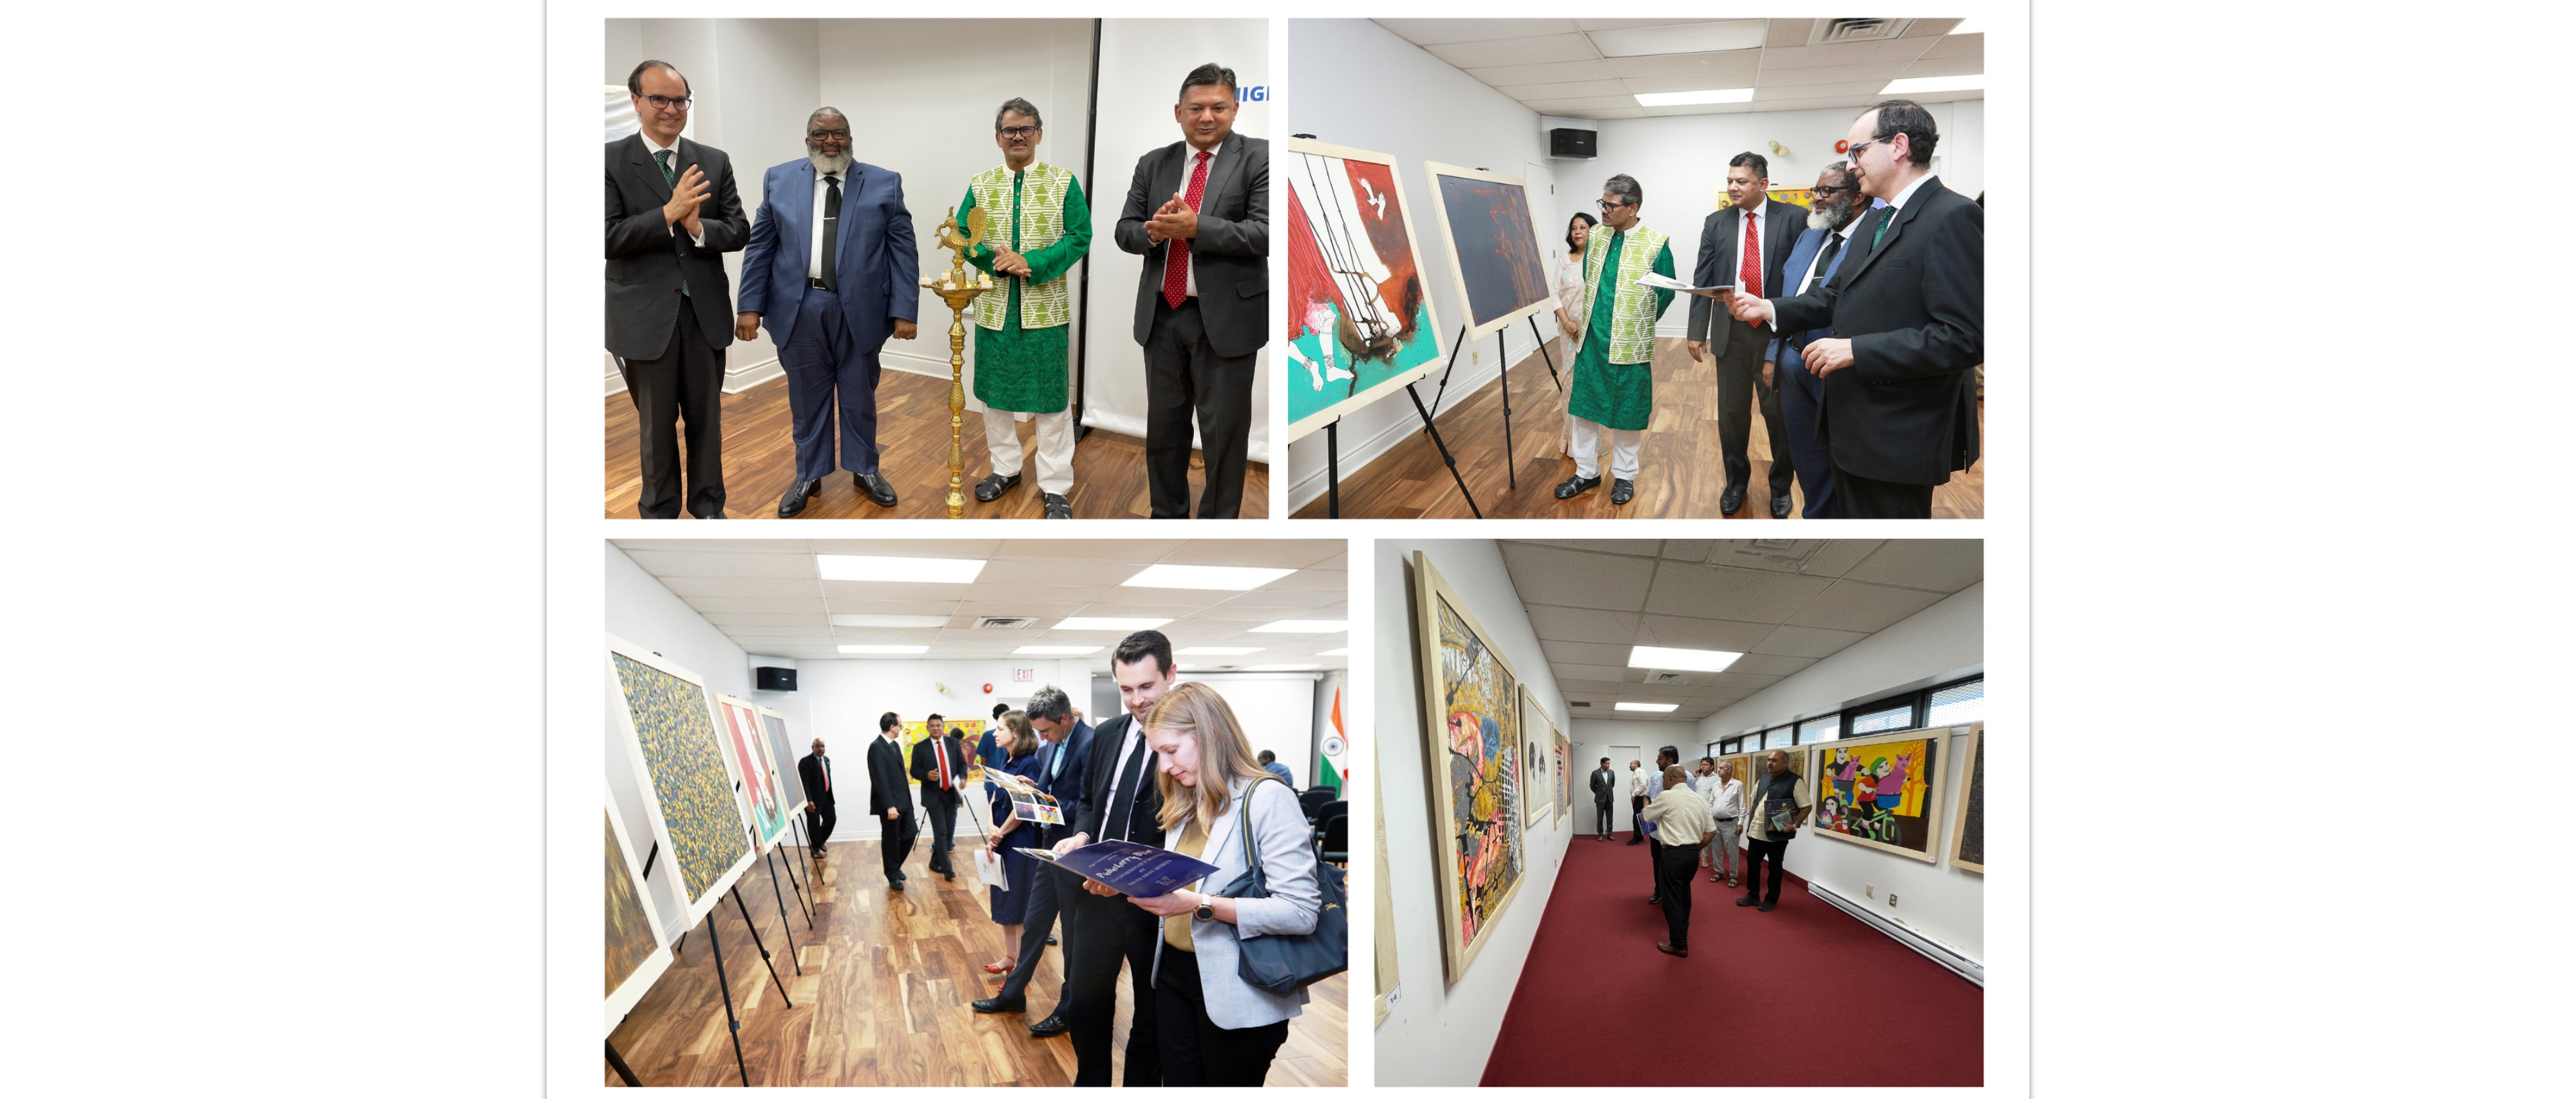  High Commission of India, Ottawa organized a painting exhibition " Puducherry Blue" supported by ICCR on 12- 29 July 2022.